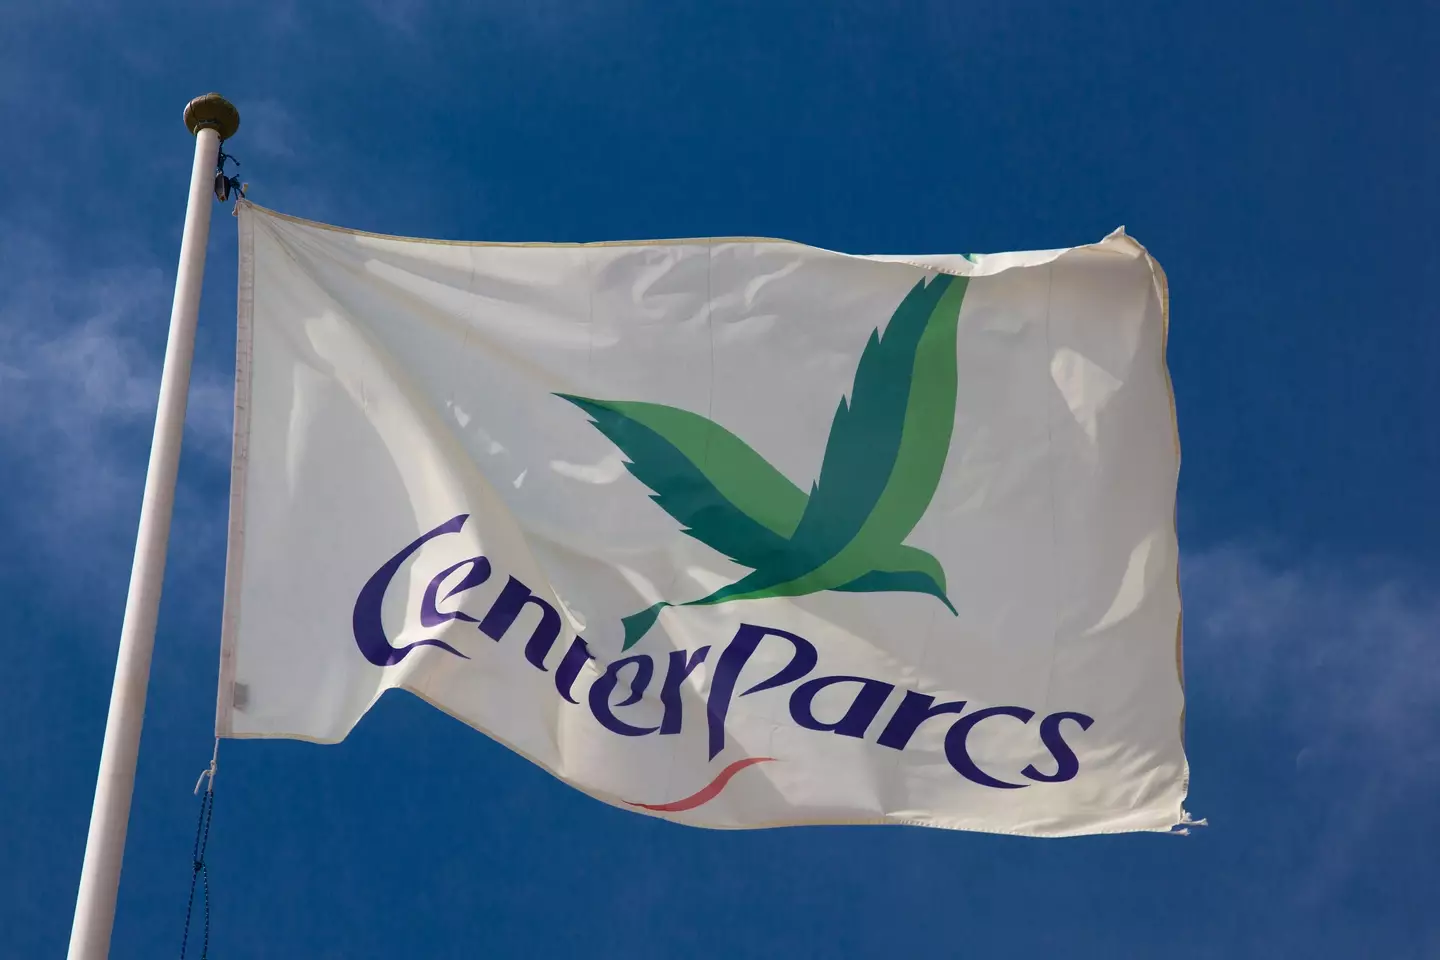 Center Parcs has been put up for sale for up to £5bn.